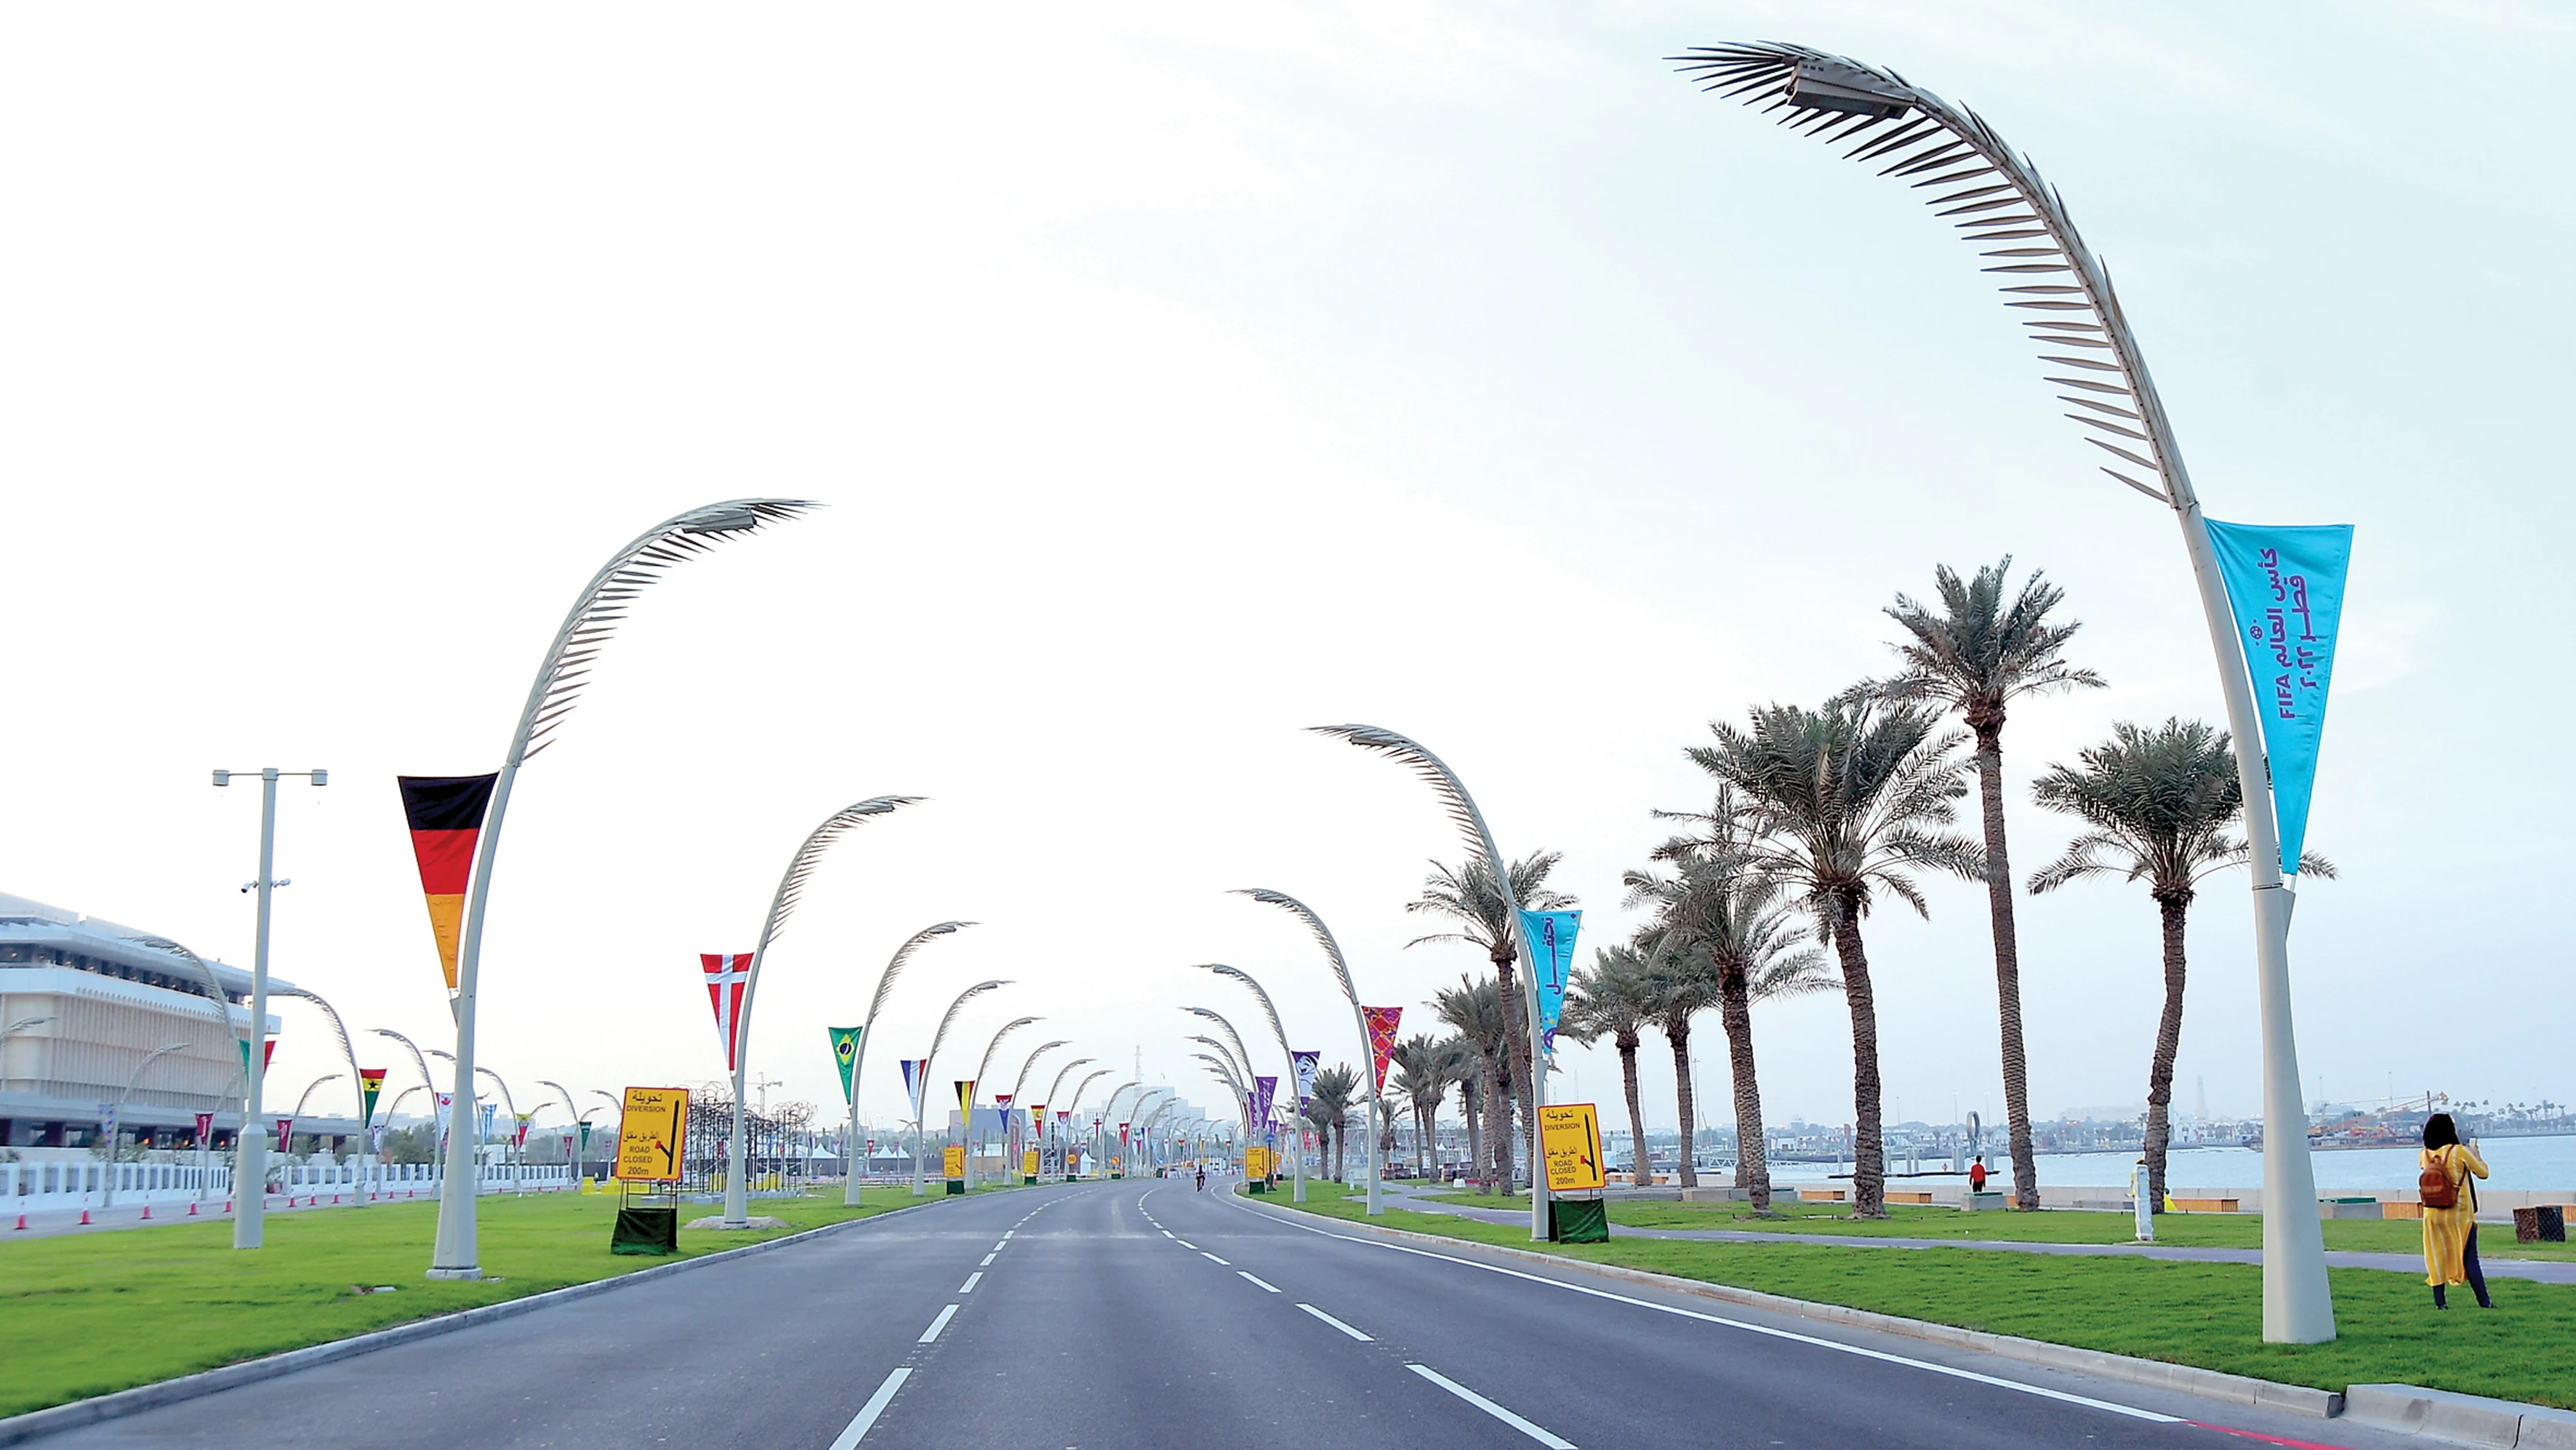 Doha Corniche - Largest Theatre of Live Performance during World Cup